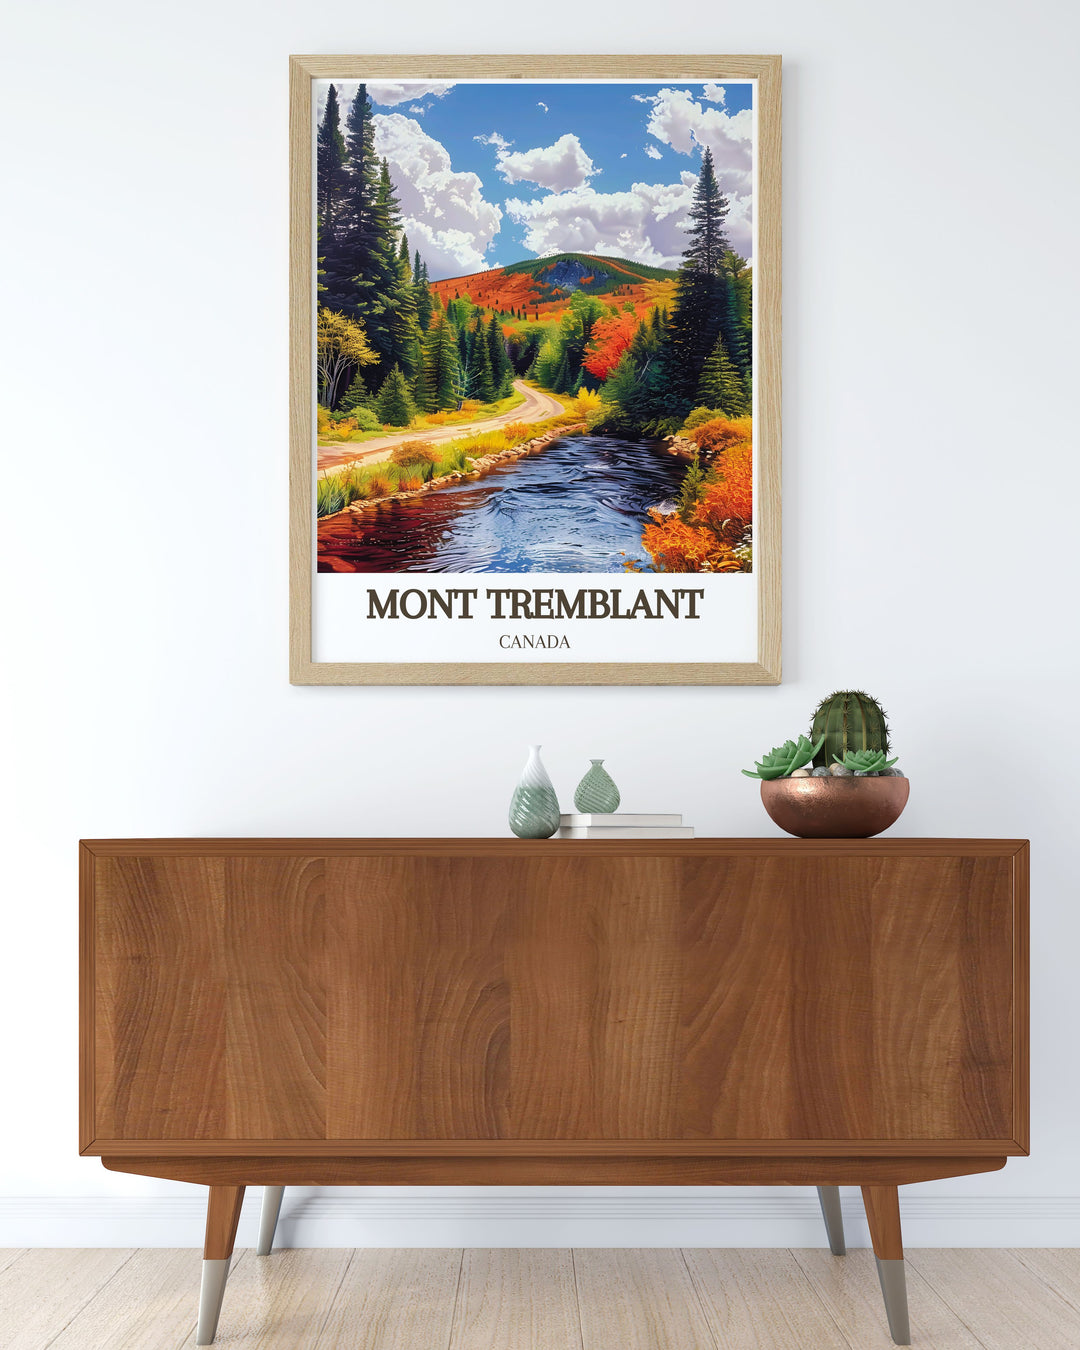 Canadian ski print of Mont Tremblant National Park capturing the essence of the Laurentian Mountains and the thrill of skiing down pristine slopes ideal for nature lovers and ski enthusiasts looking to add adventure to their home decor.